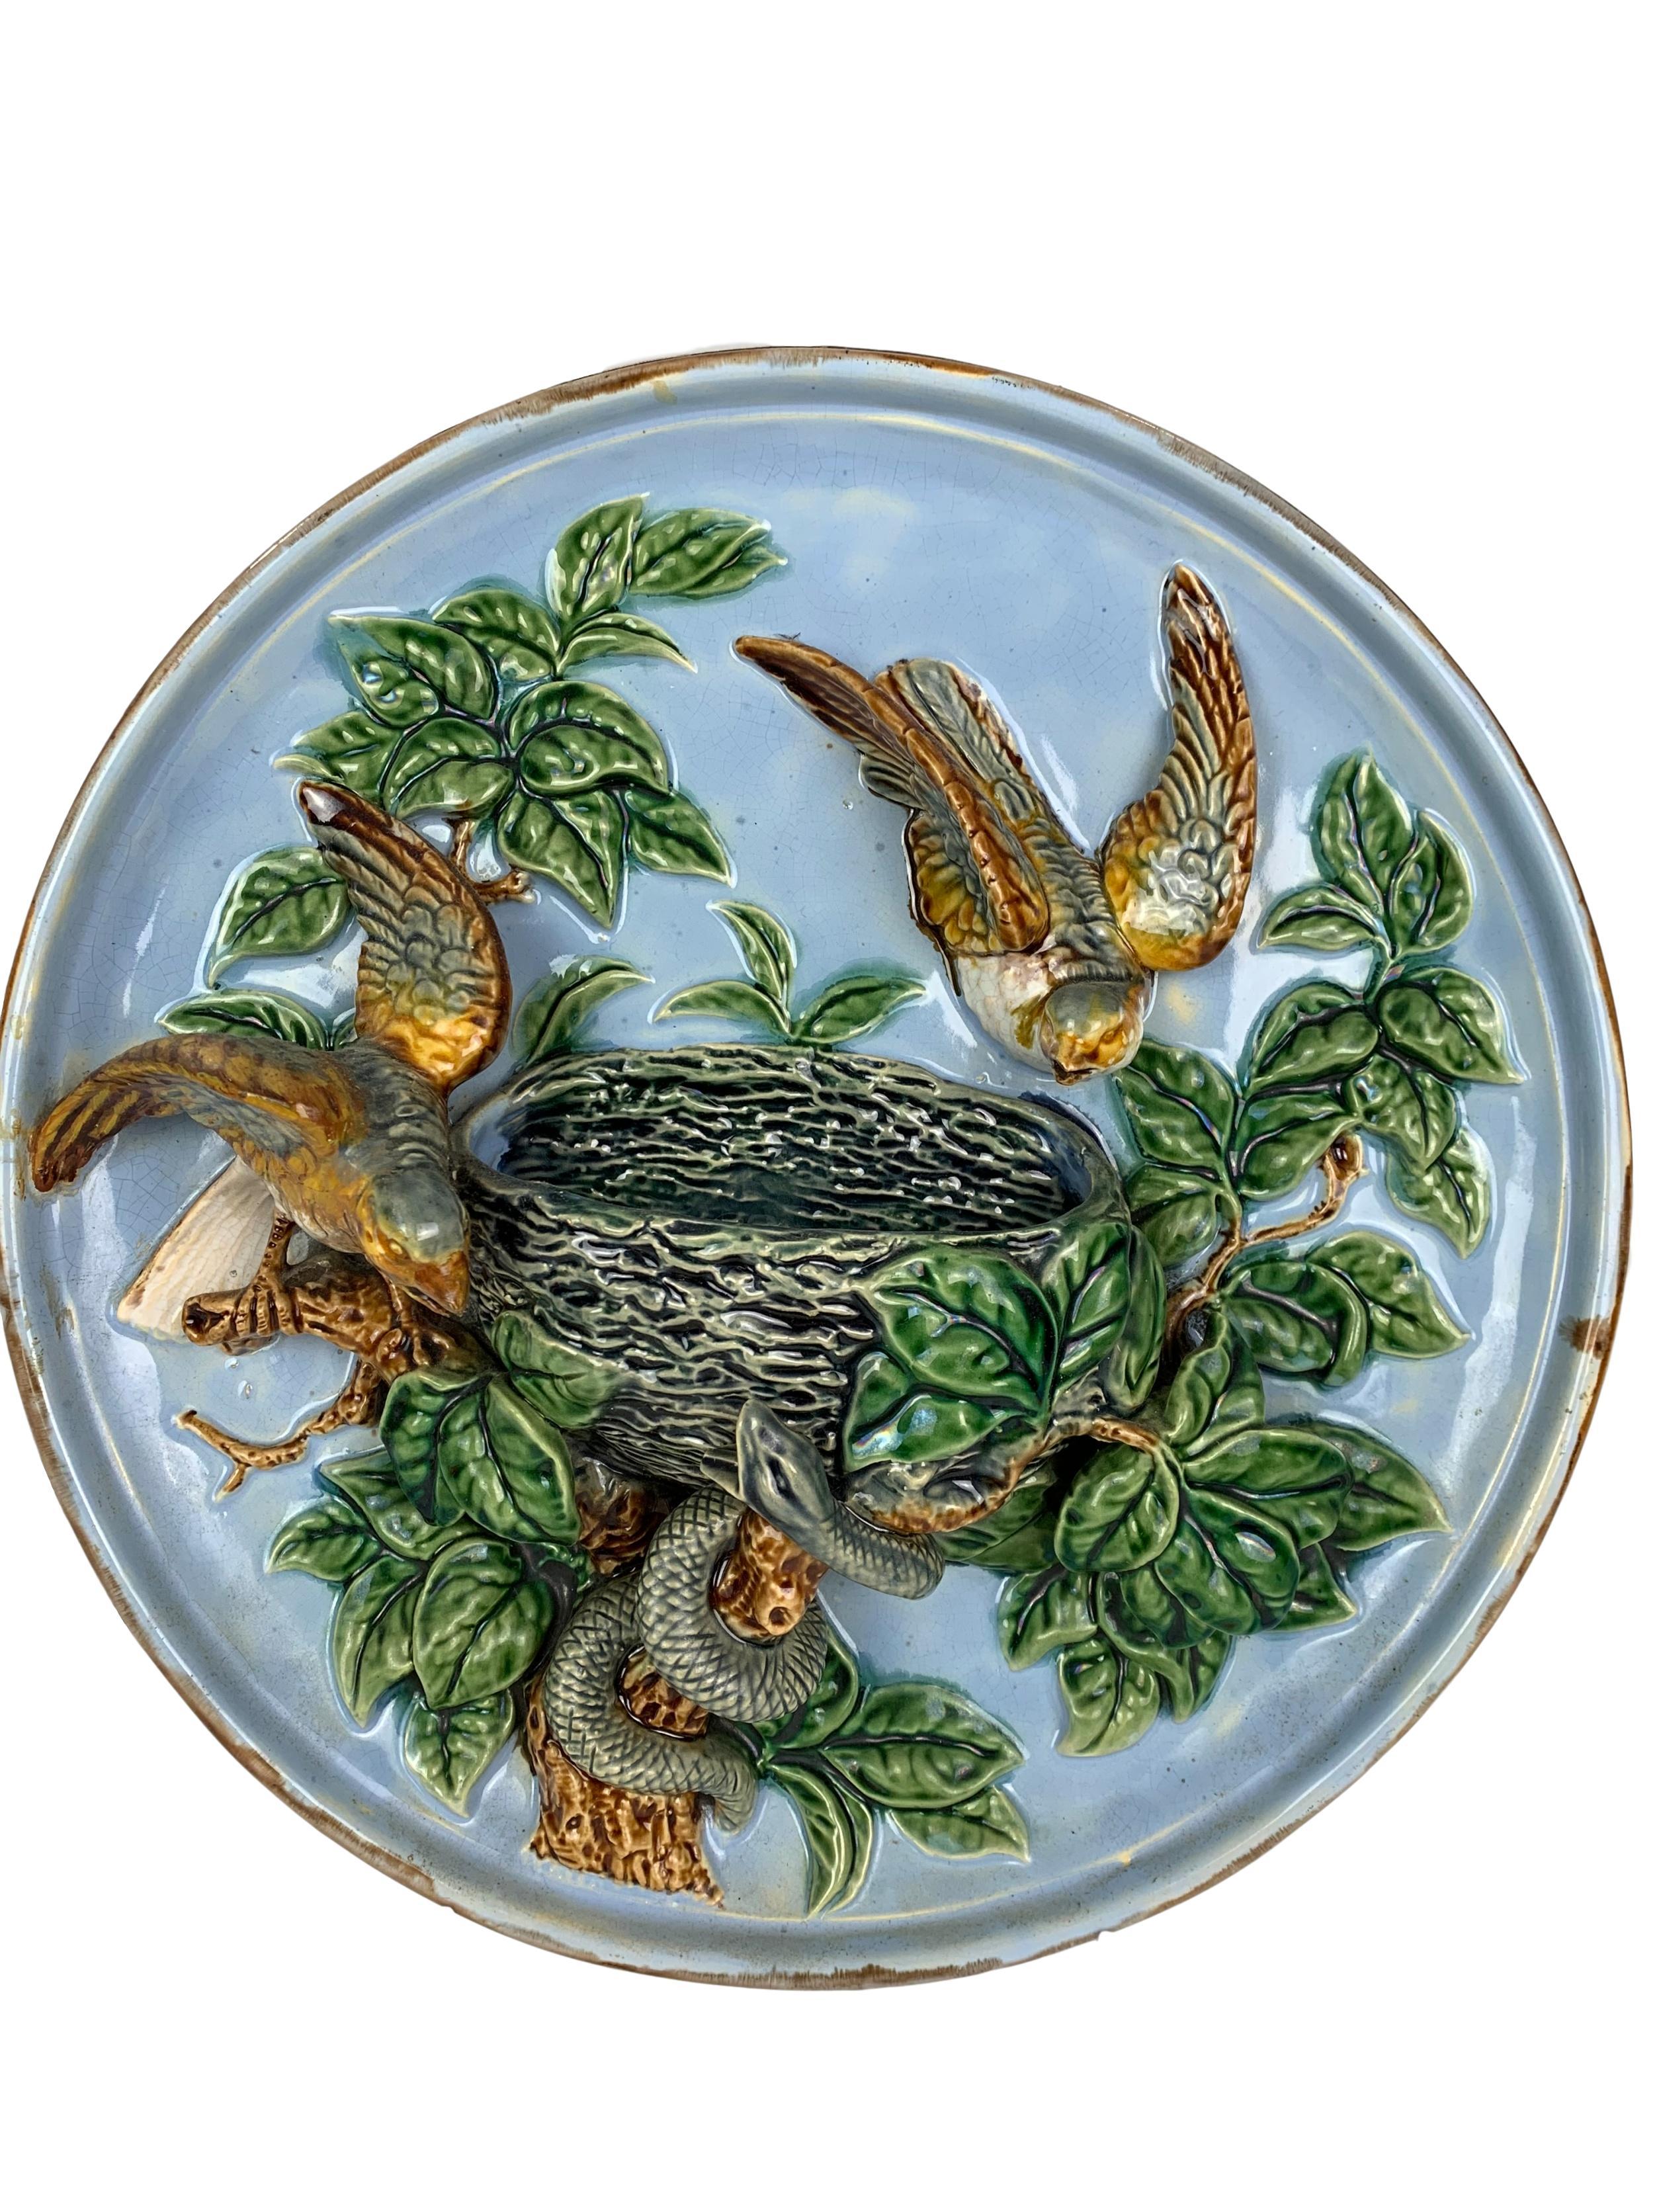 Majolica birds, nest and snake wall pocket plaque, circa 1880. Ginori Factory, Italy. Wing has been restored.